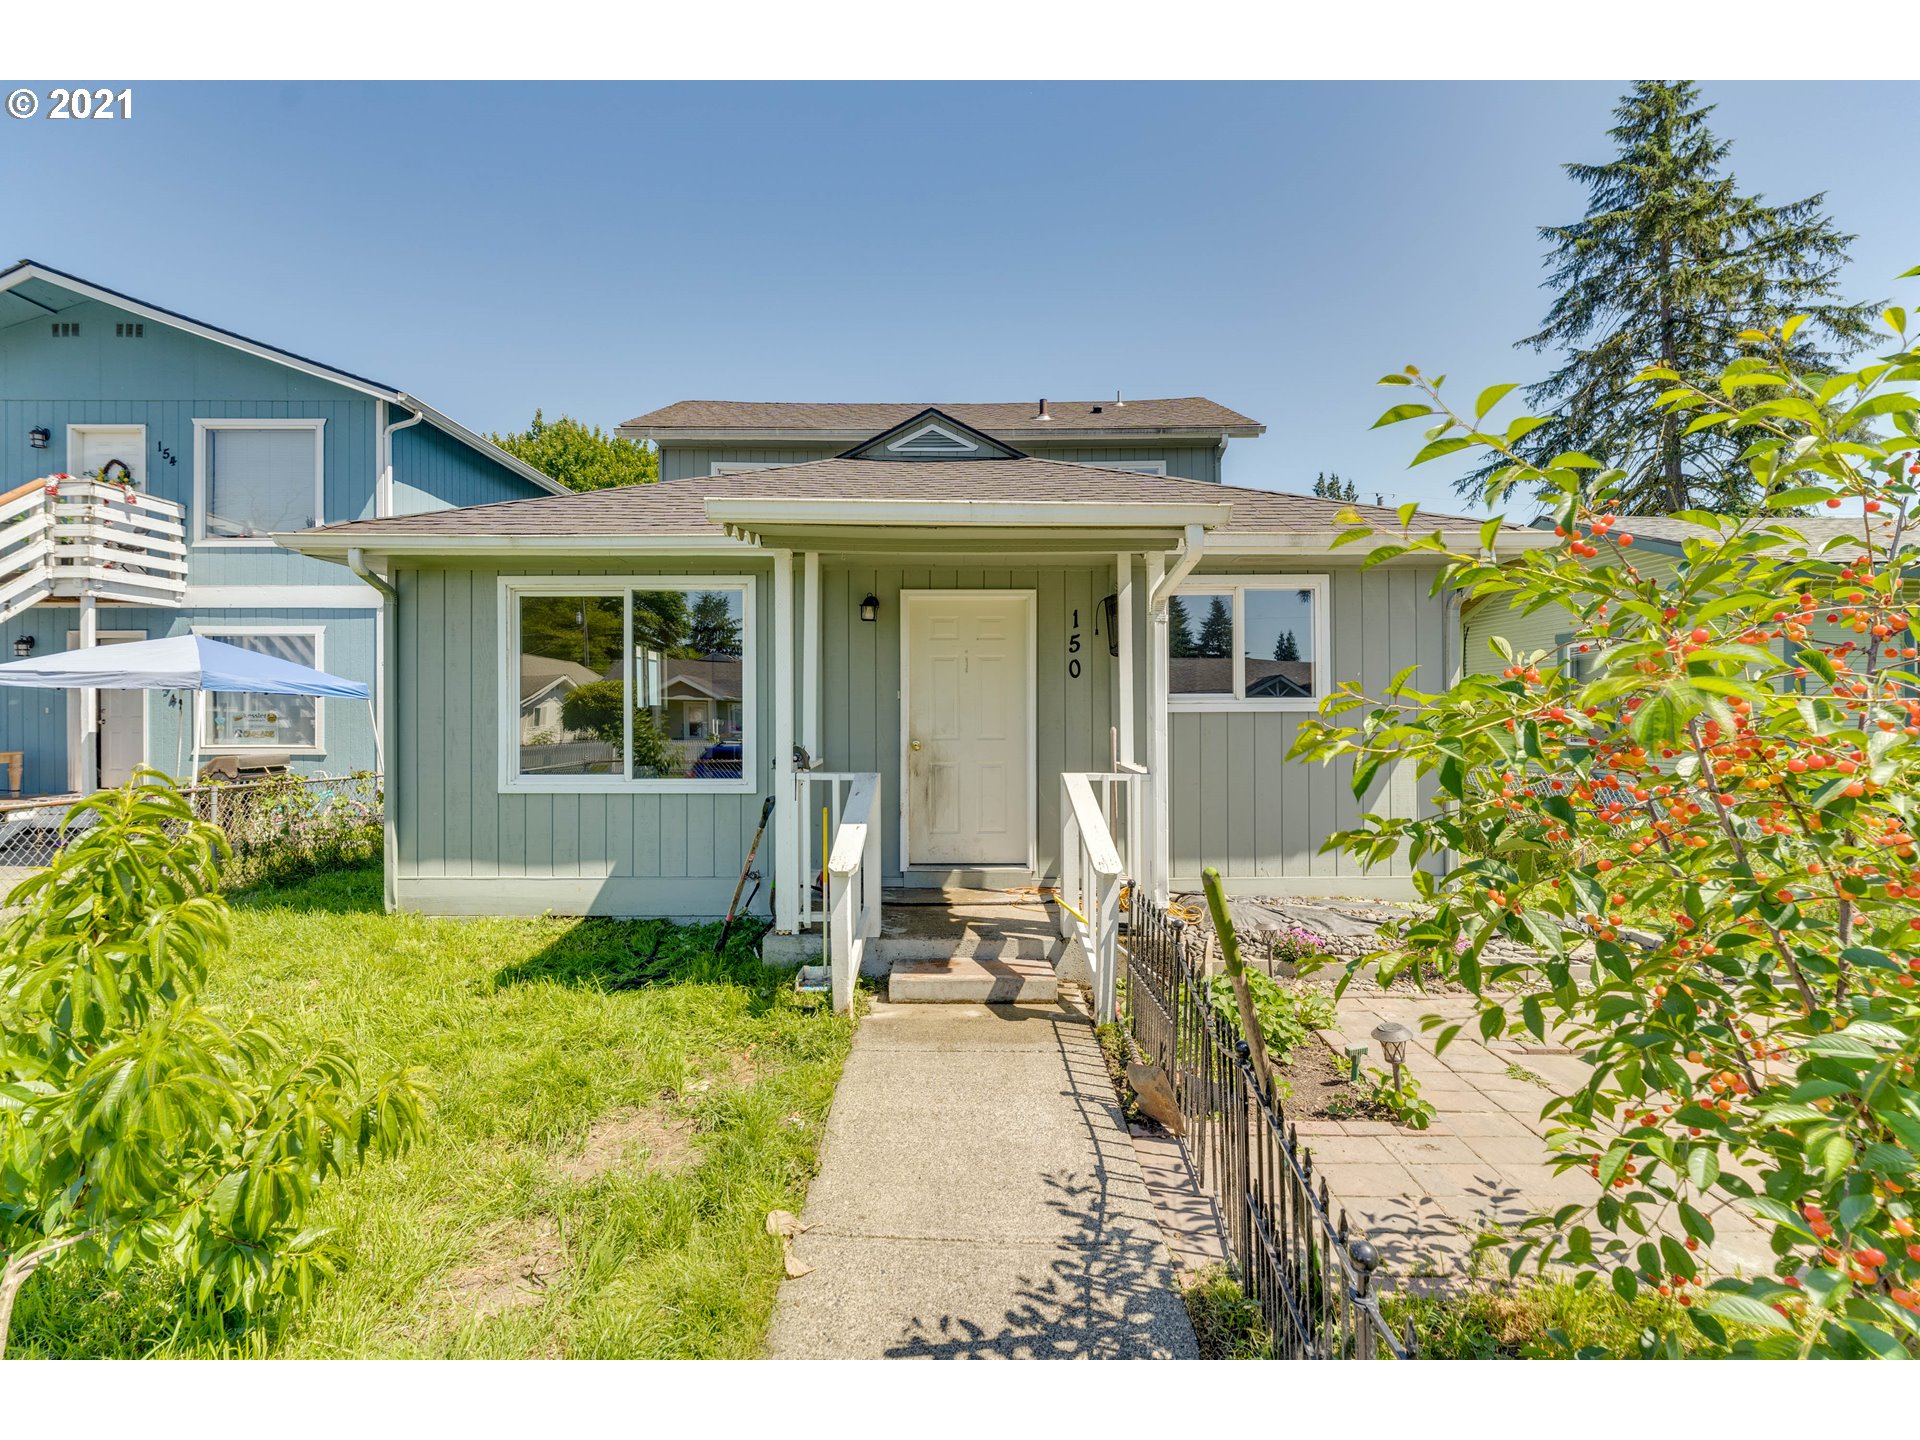 150 16TH AVE (1 of 23)